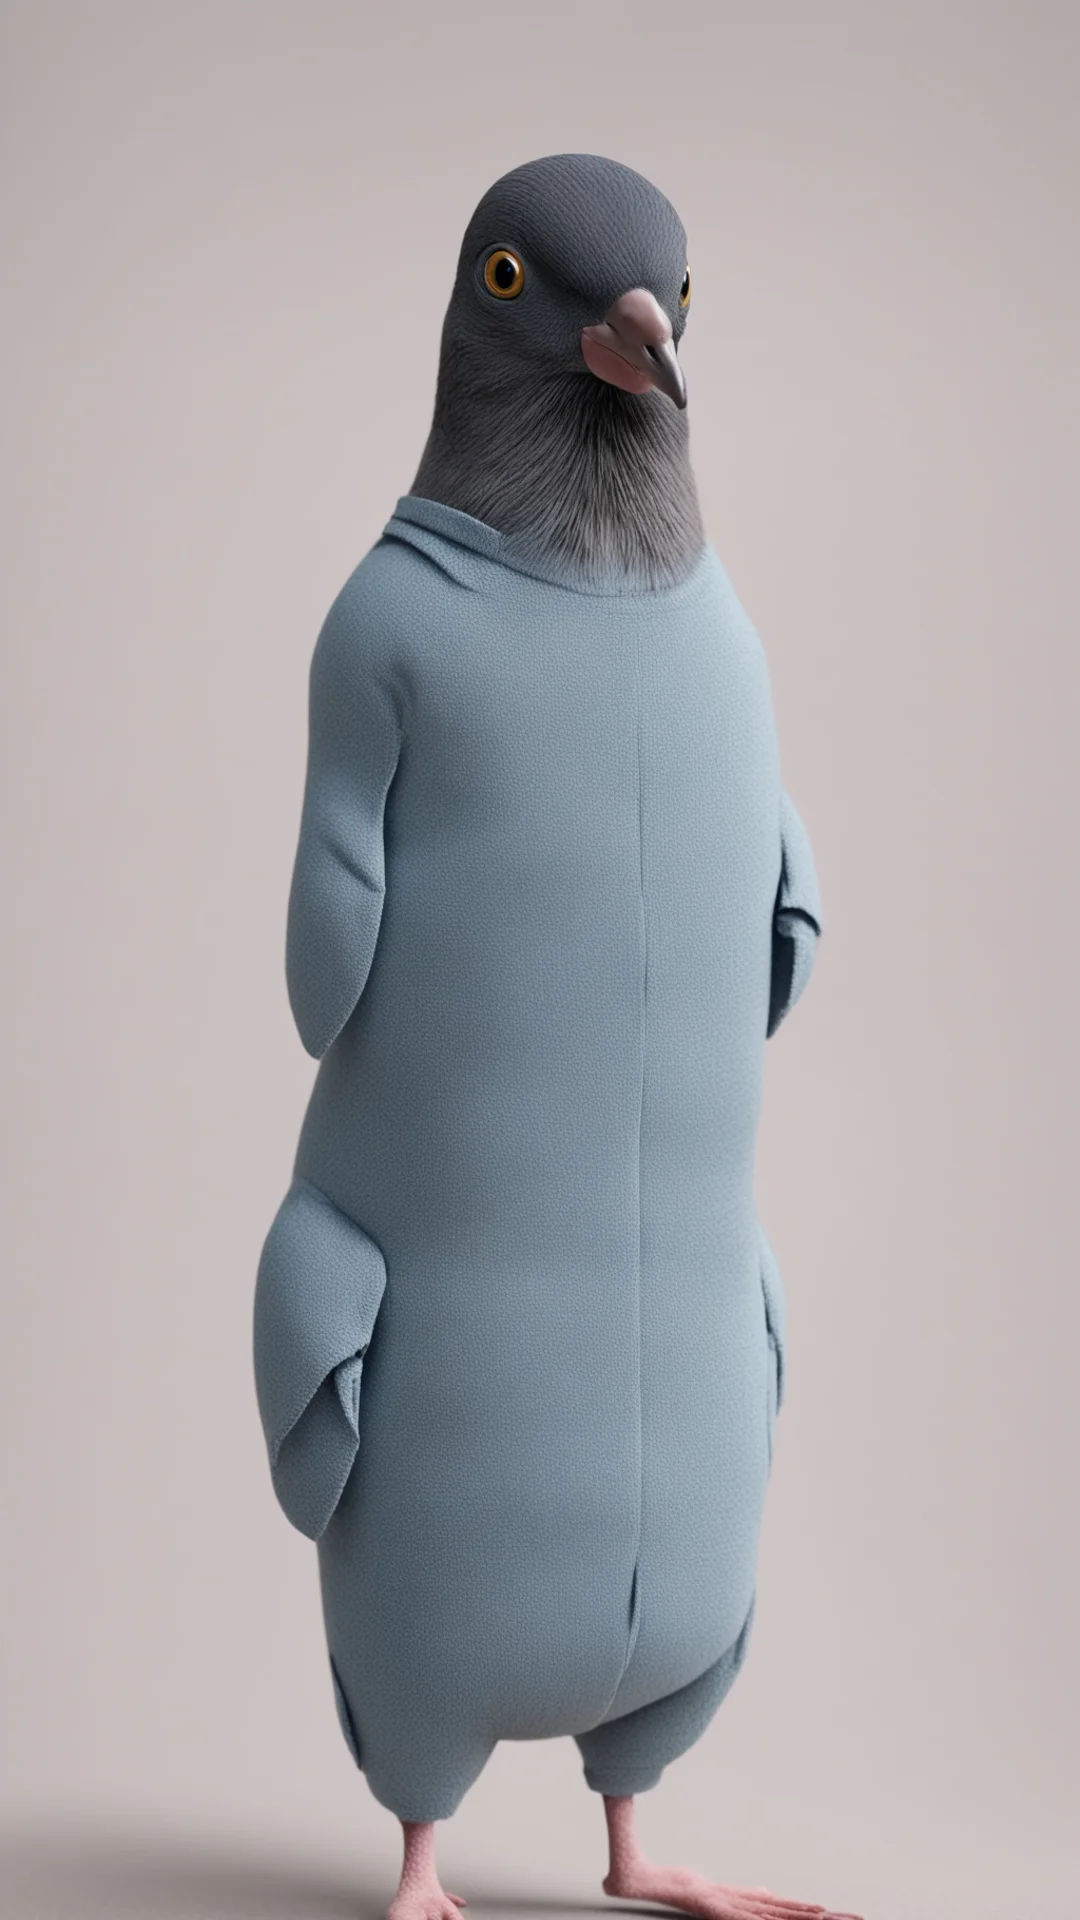 aiamazing a pigeon wearing a tracksuit in a stop motion movie awesome portrait 2 tall